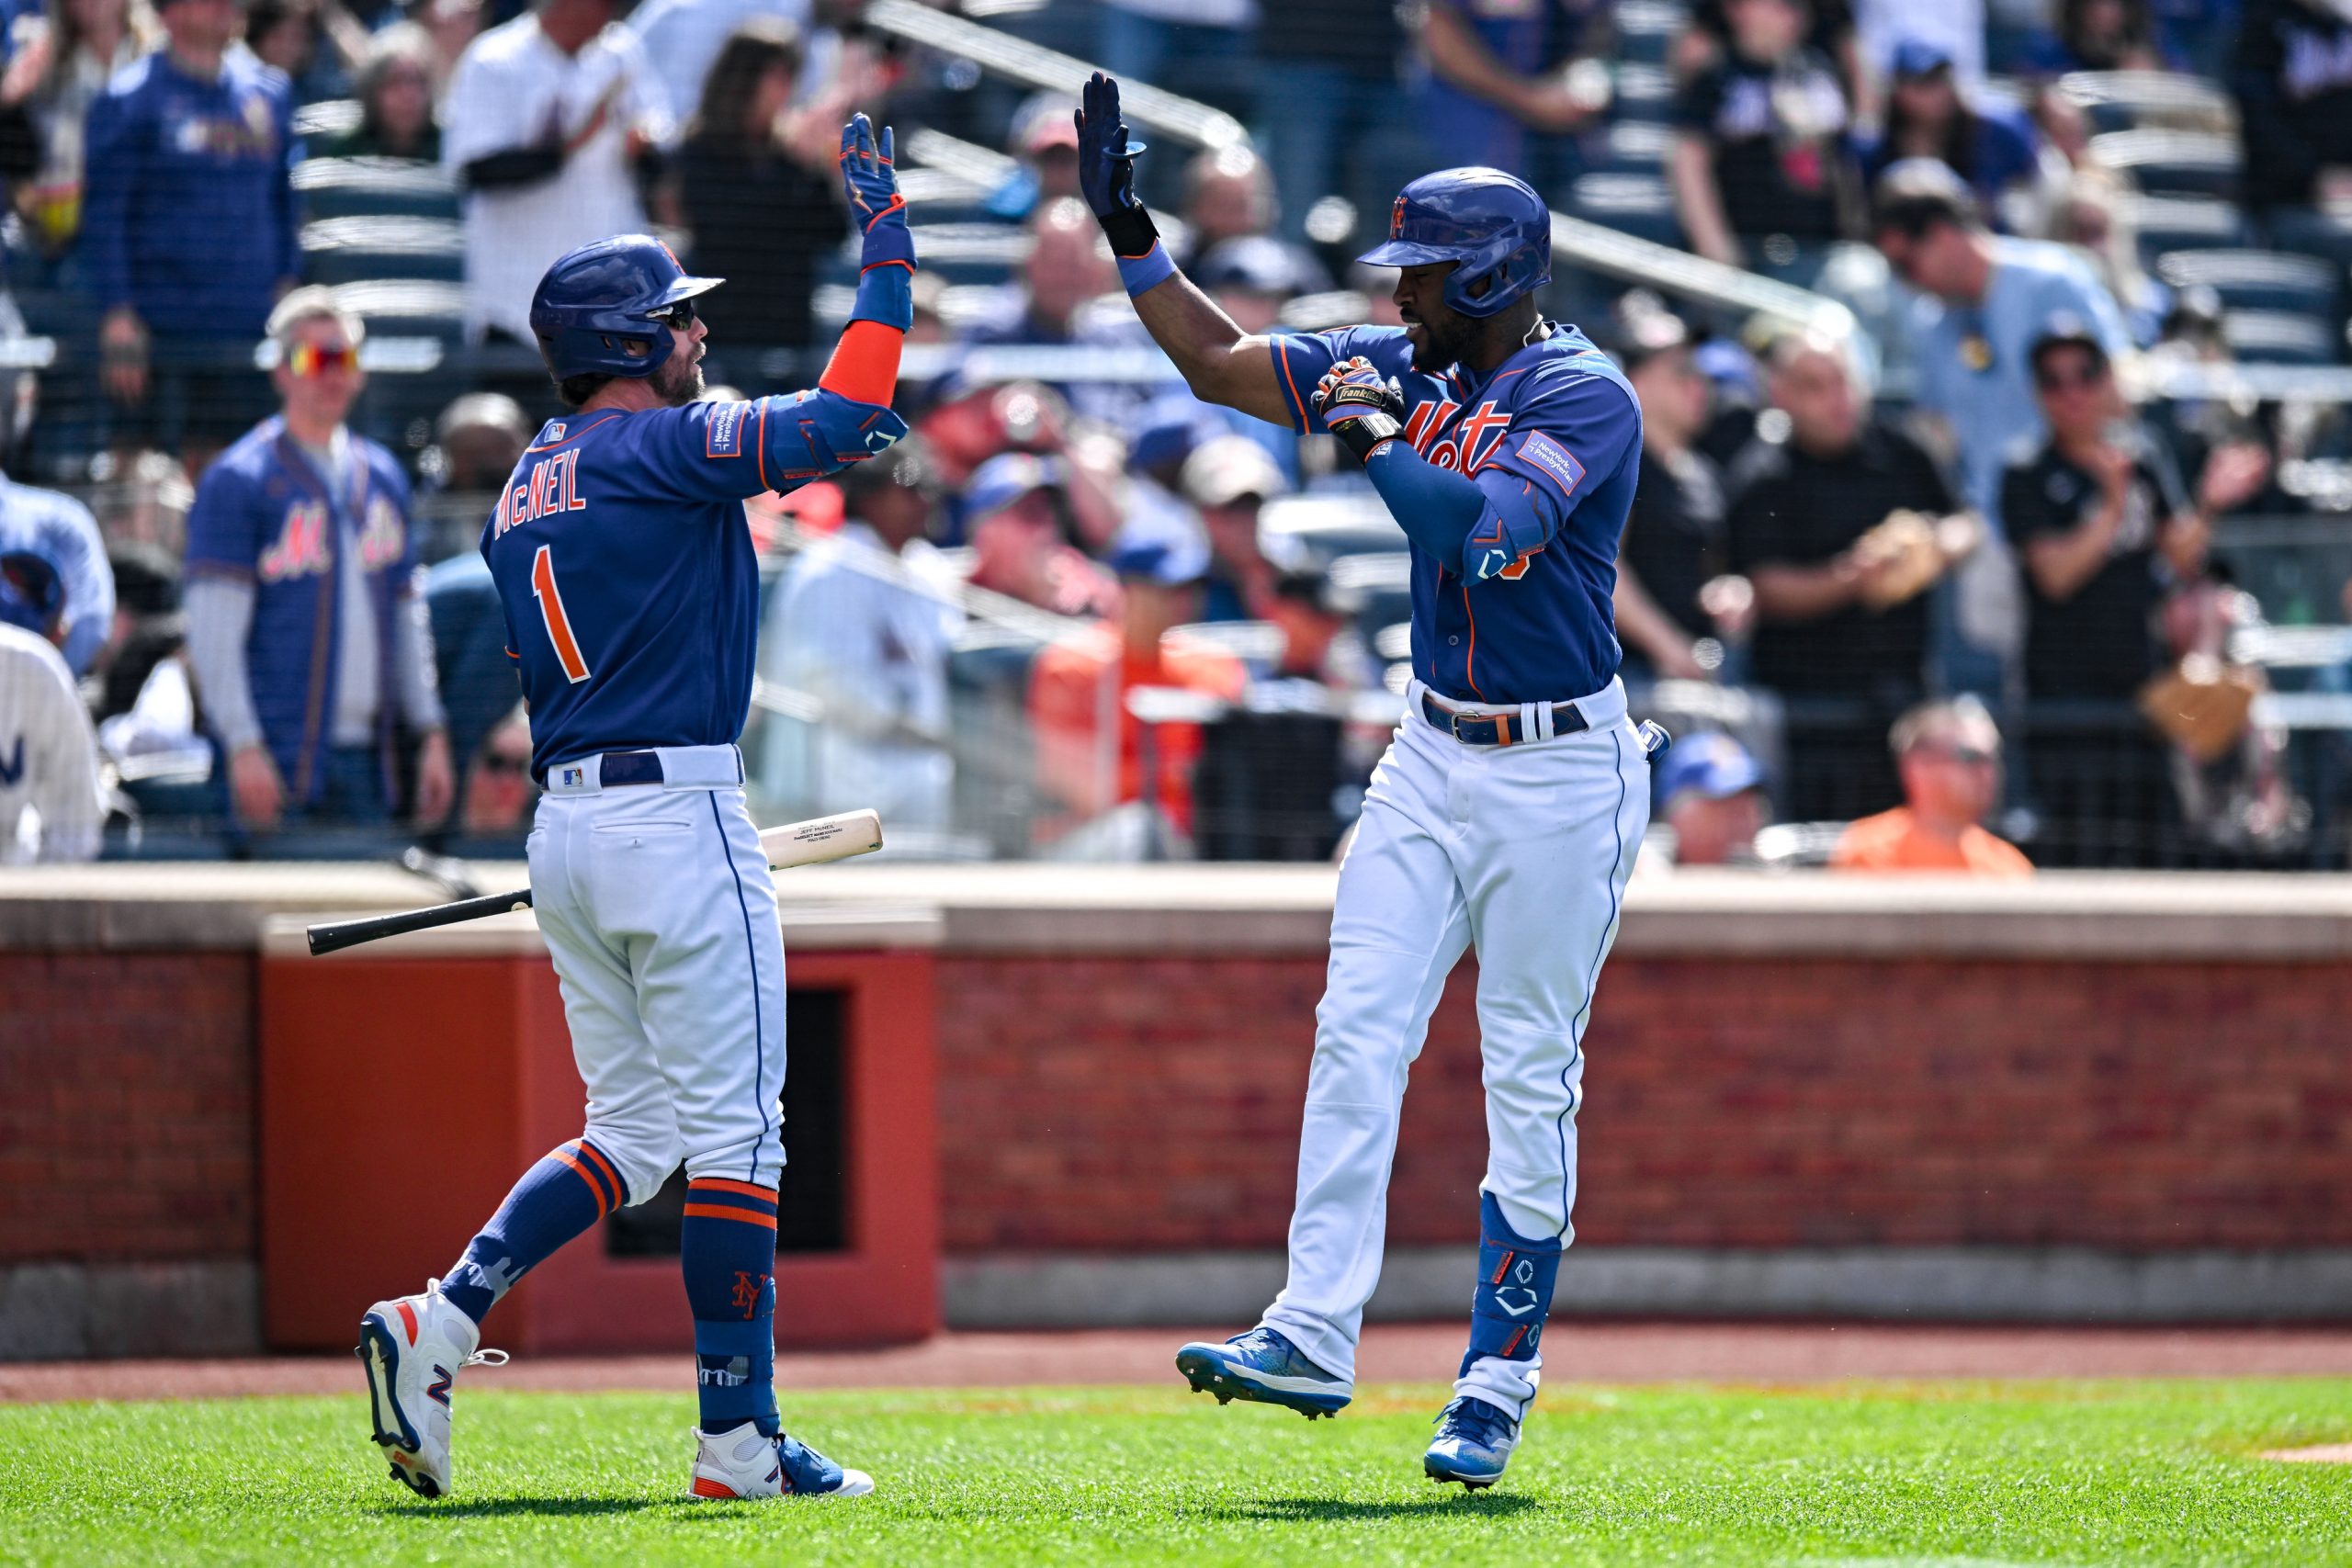 Will Mets' Starling Marte return from groin injury before season ends?